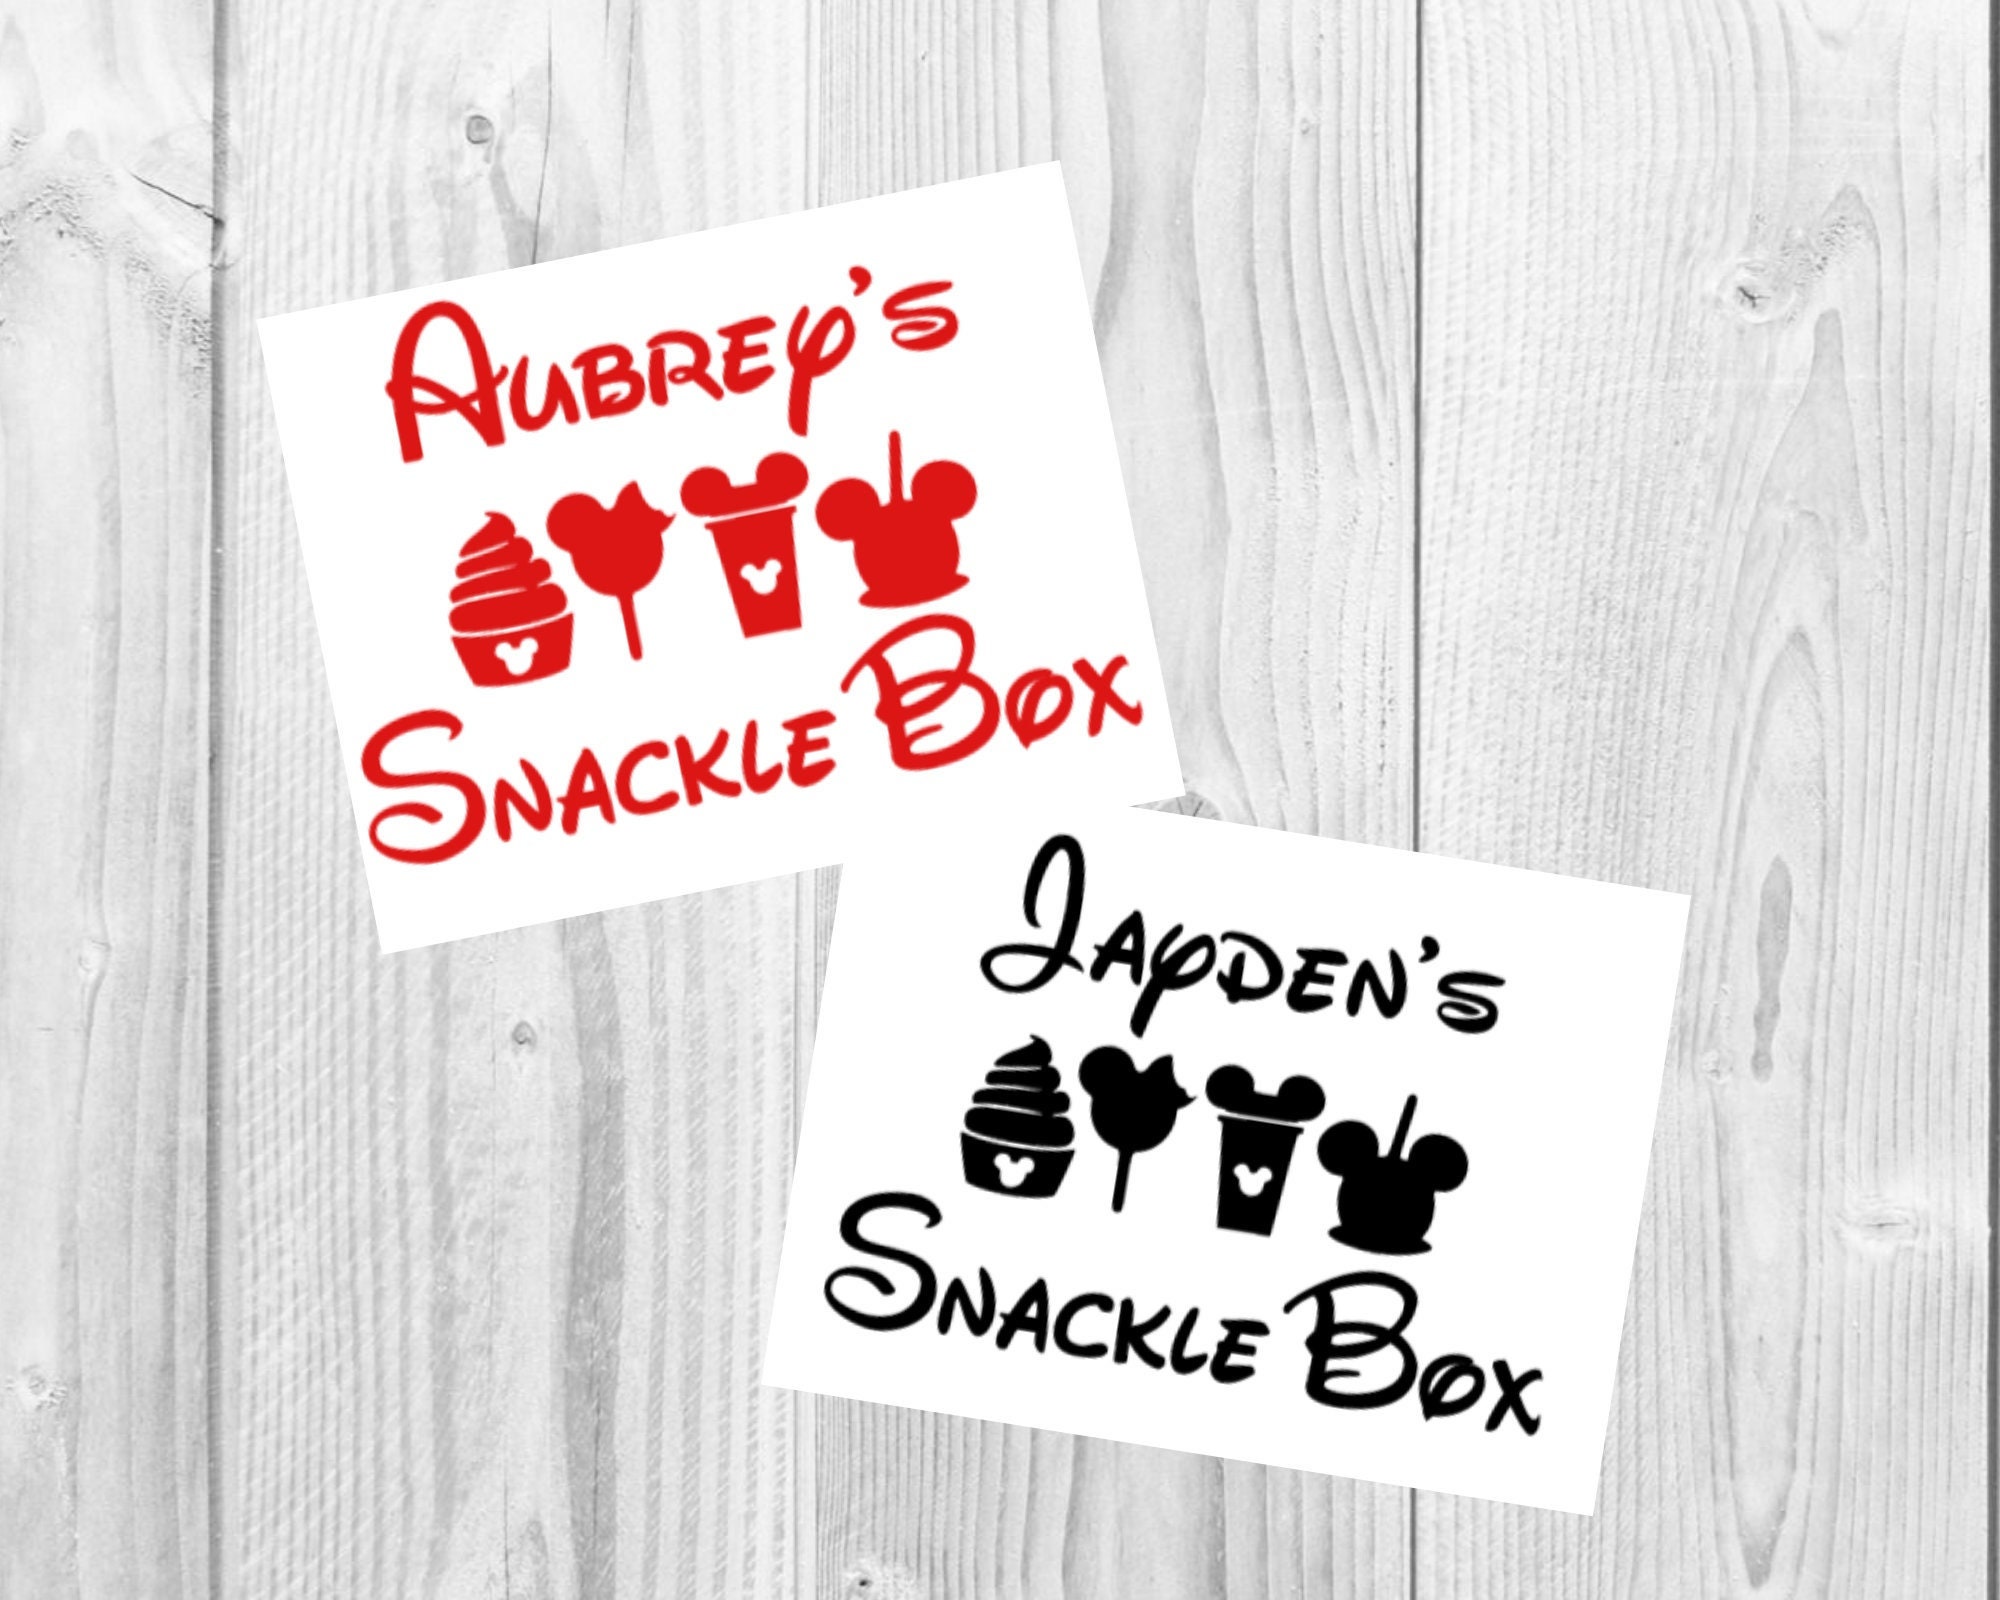 Personalized Snackle Box Decal Mouse Inspired Snack Box Decal Snack Kit  Decal Vacation Snack Box Snack Box Name Decal Name Tag 